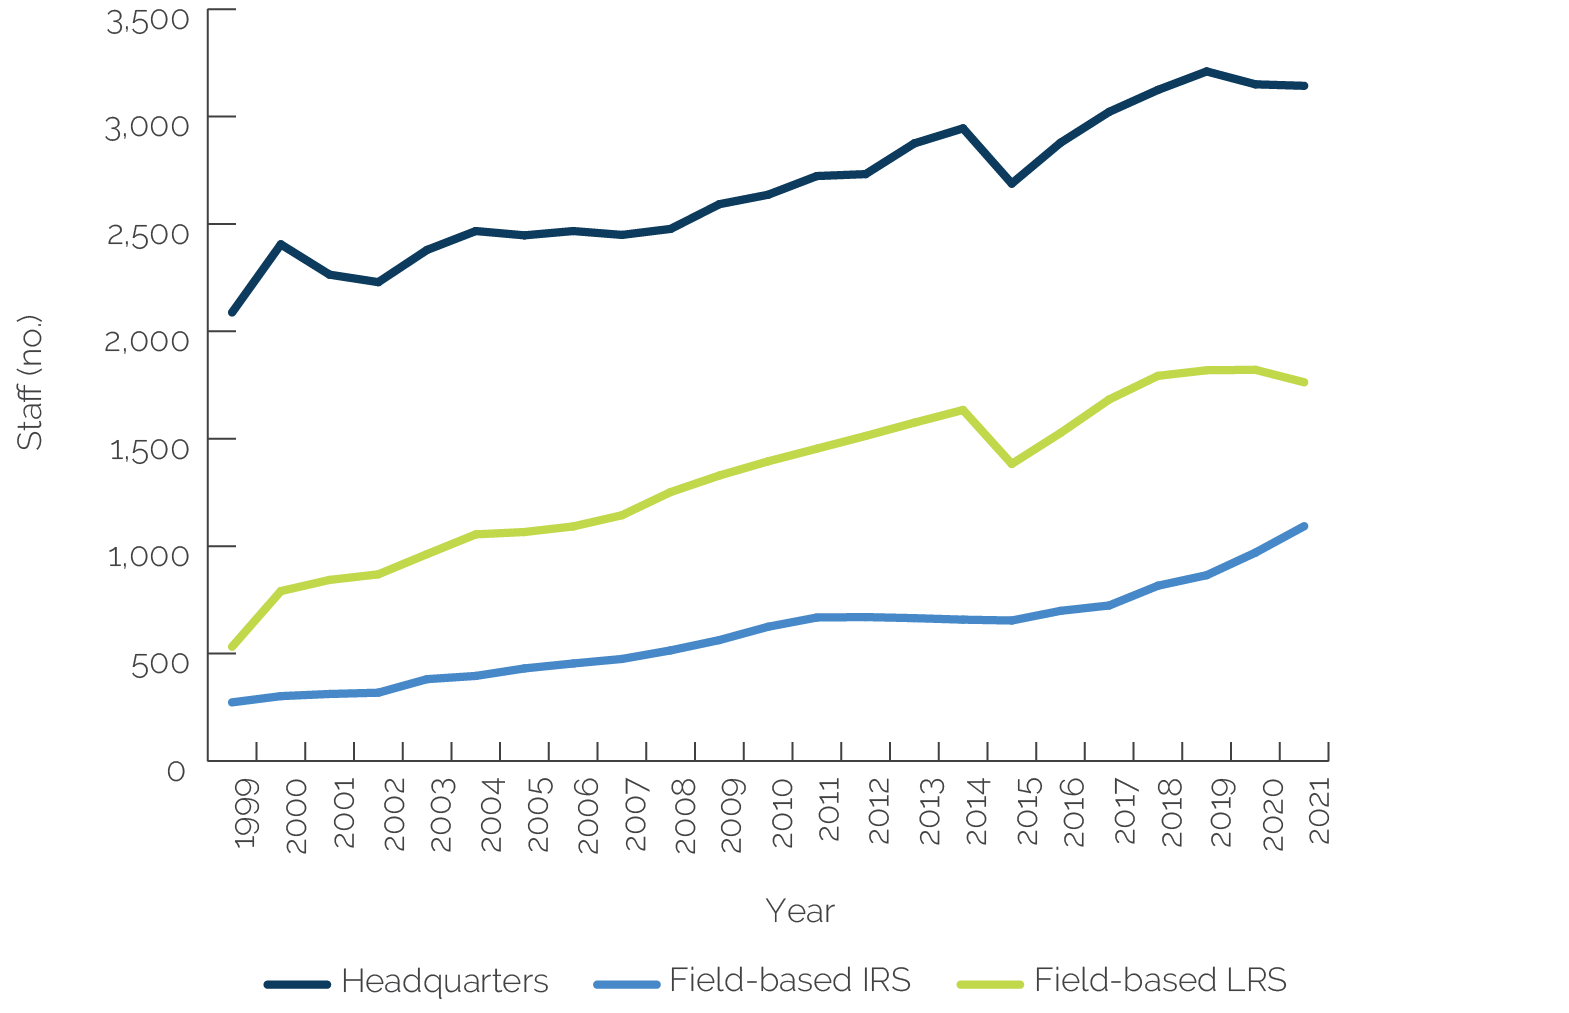 Line chart showing the increase in staff numbers at headquarters and in the field, recruited locally or internationally.